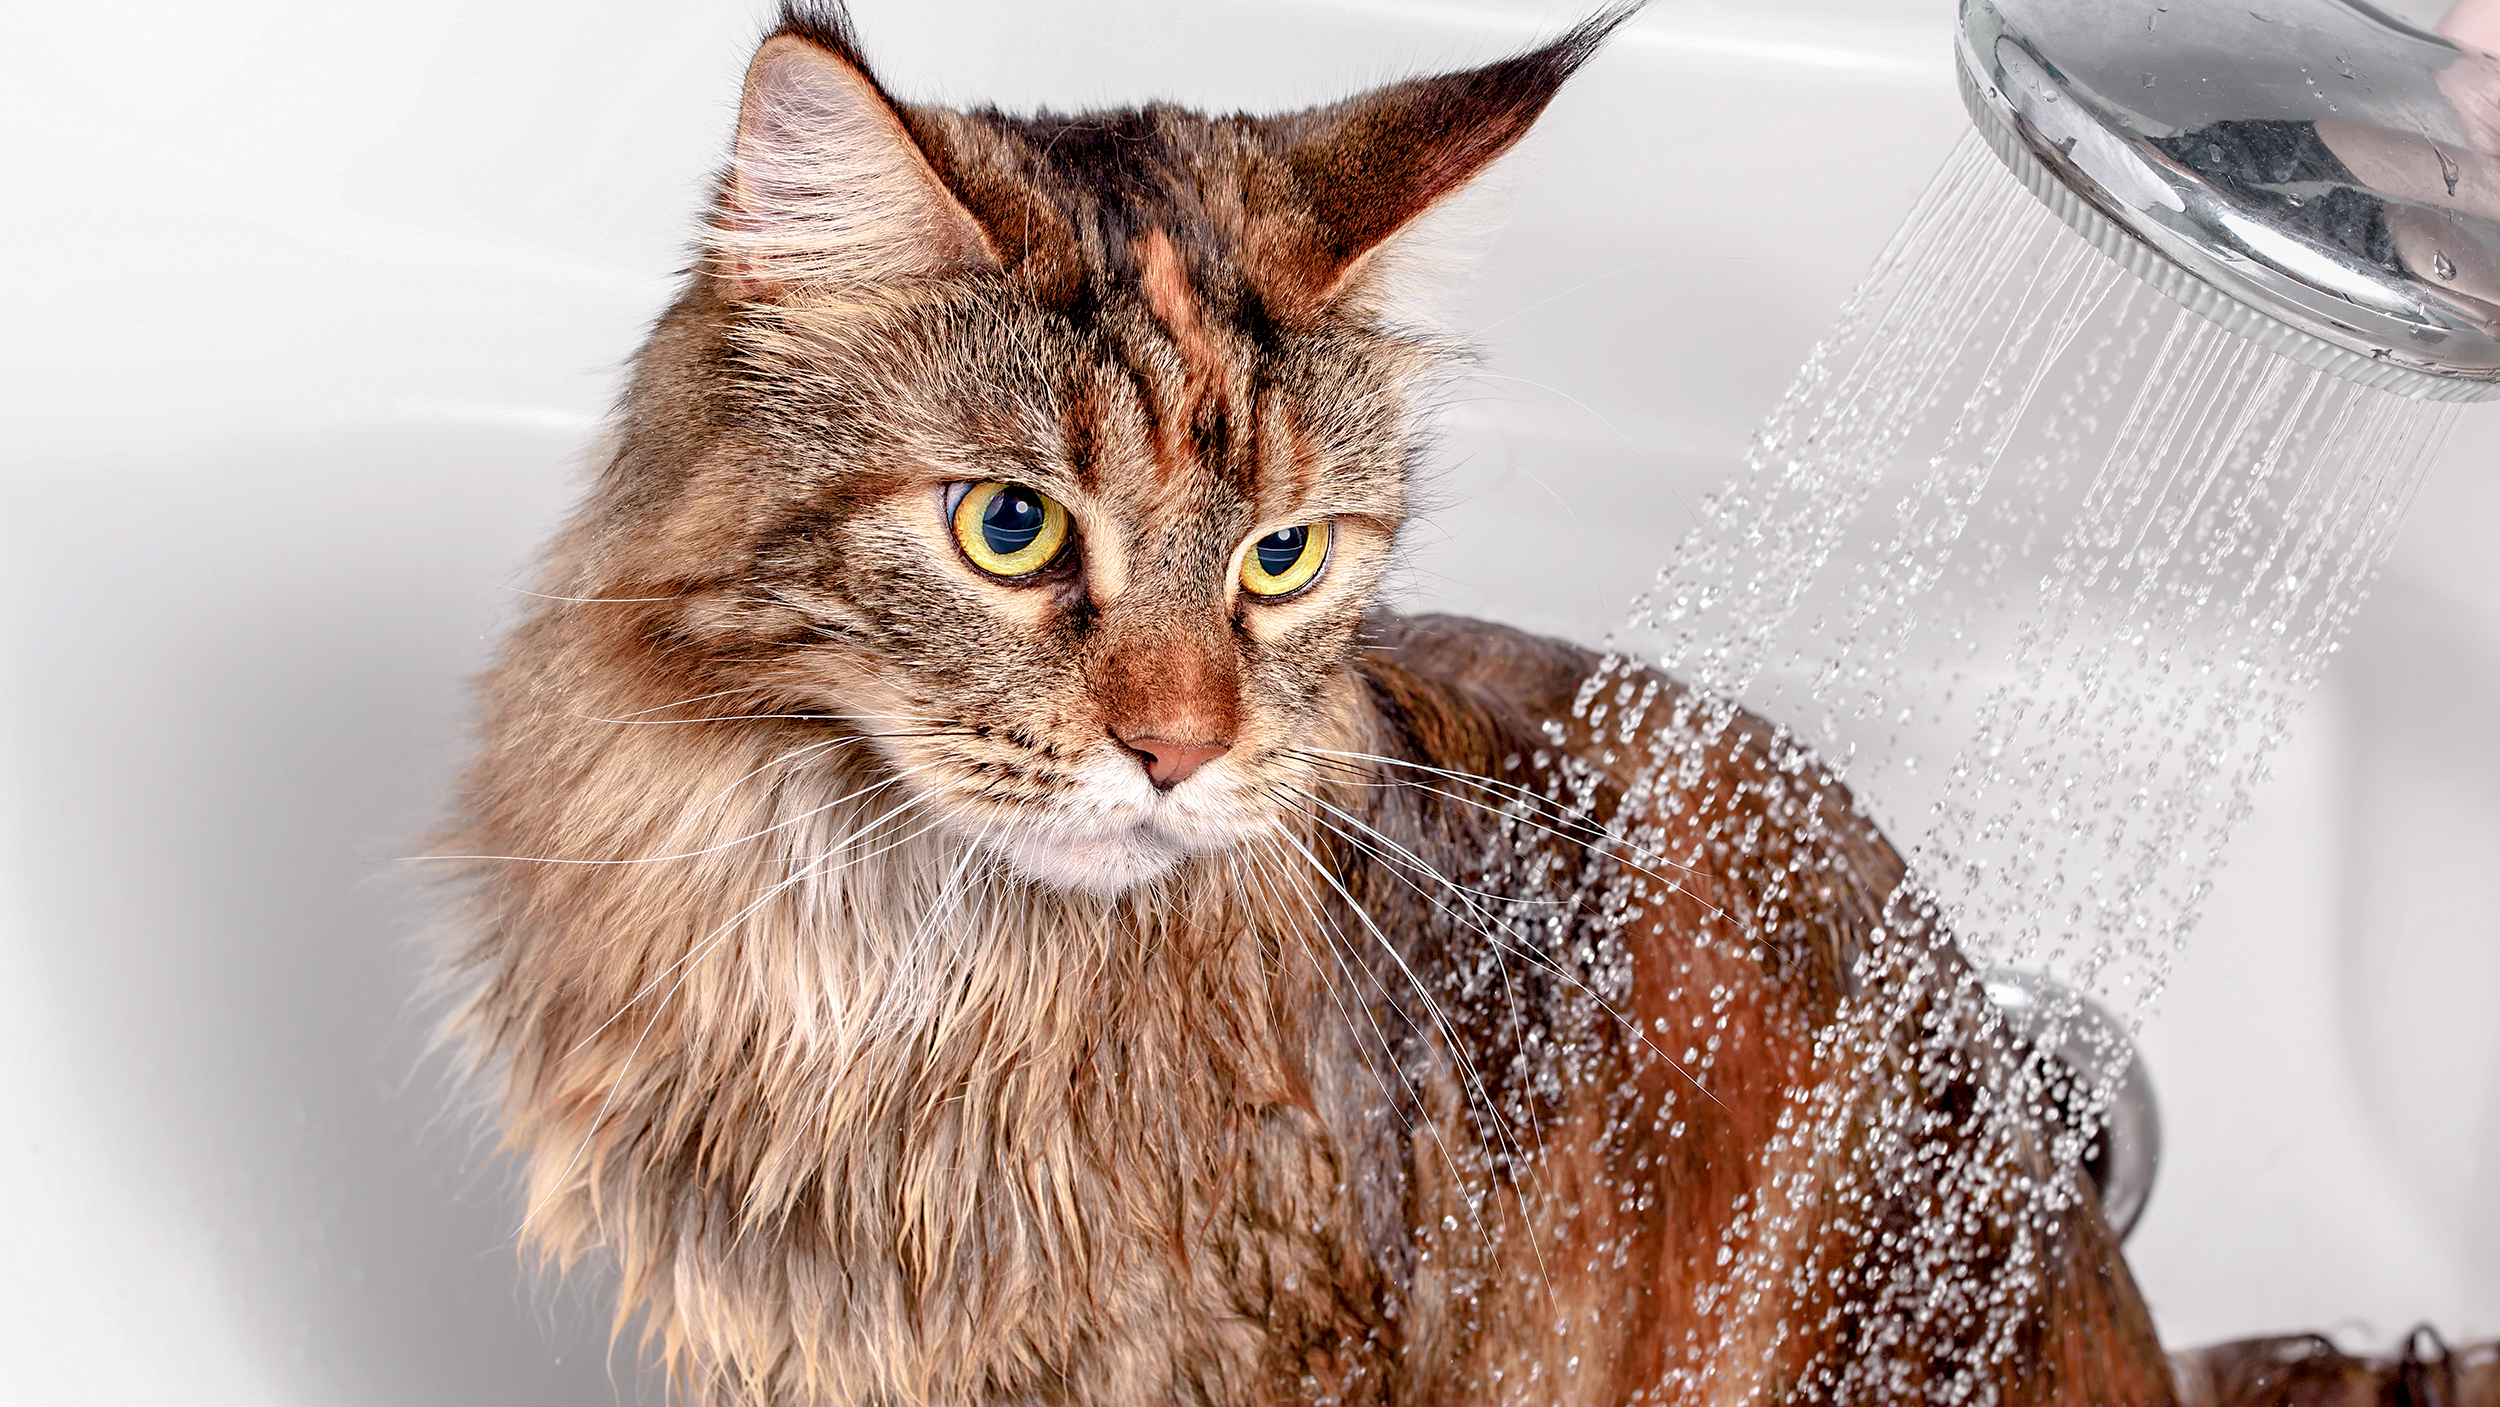 Adult Maine Coon sitting in a bath being washed with a shower head.